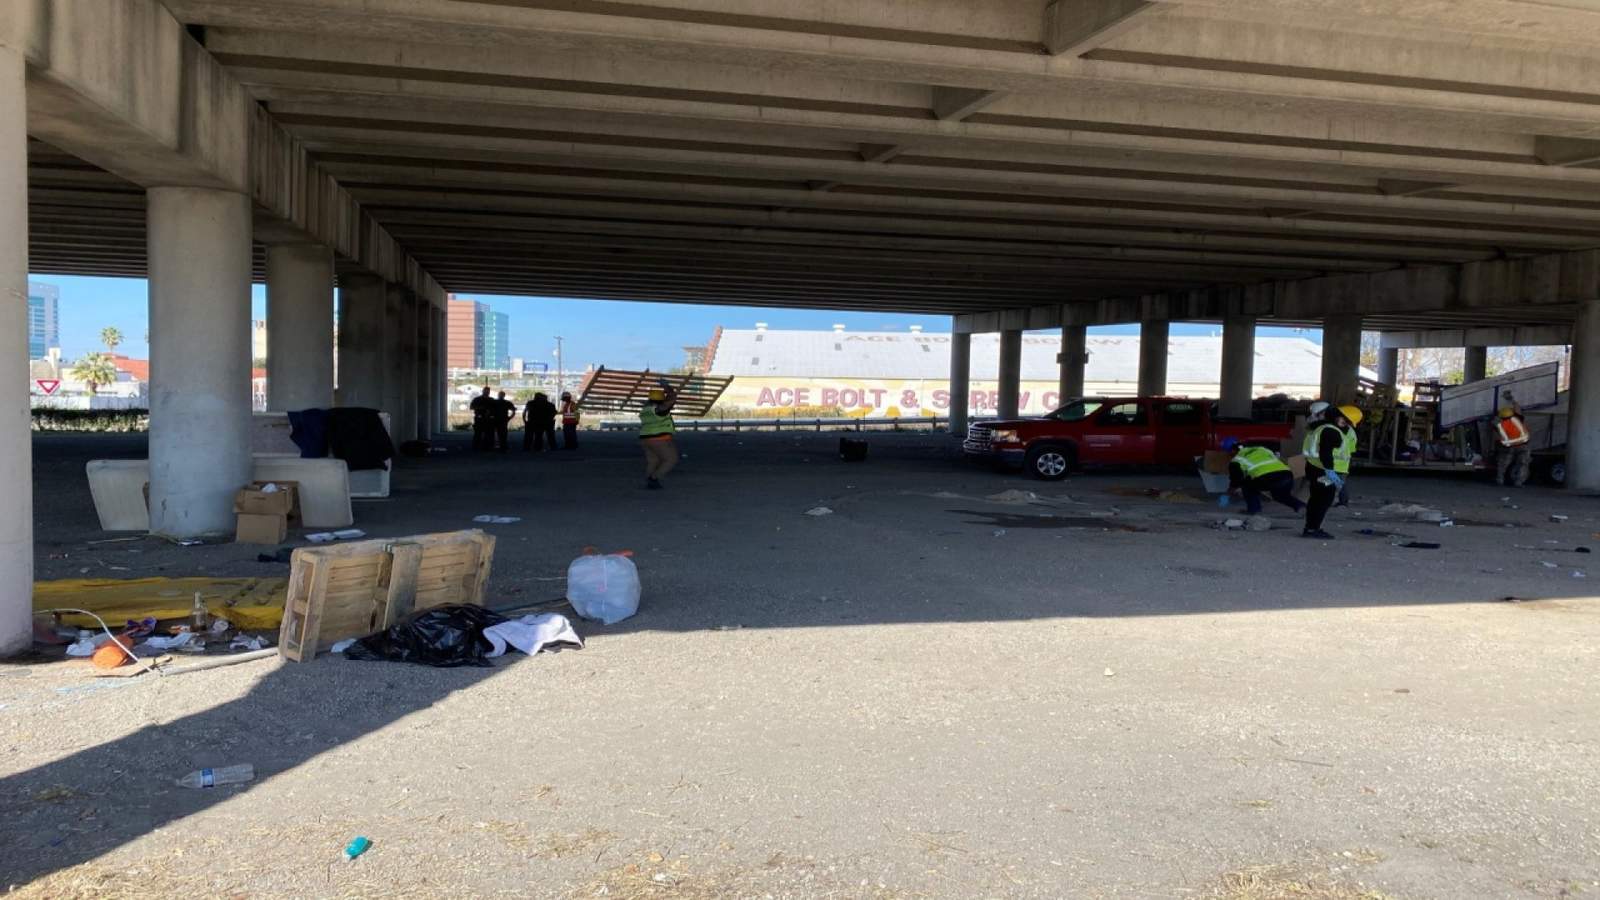 Homeless camp in downtown San Antonio shut down by city